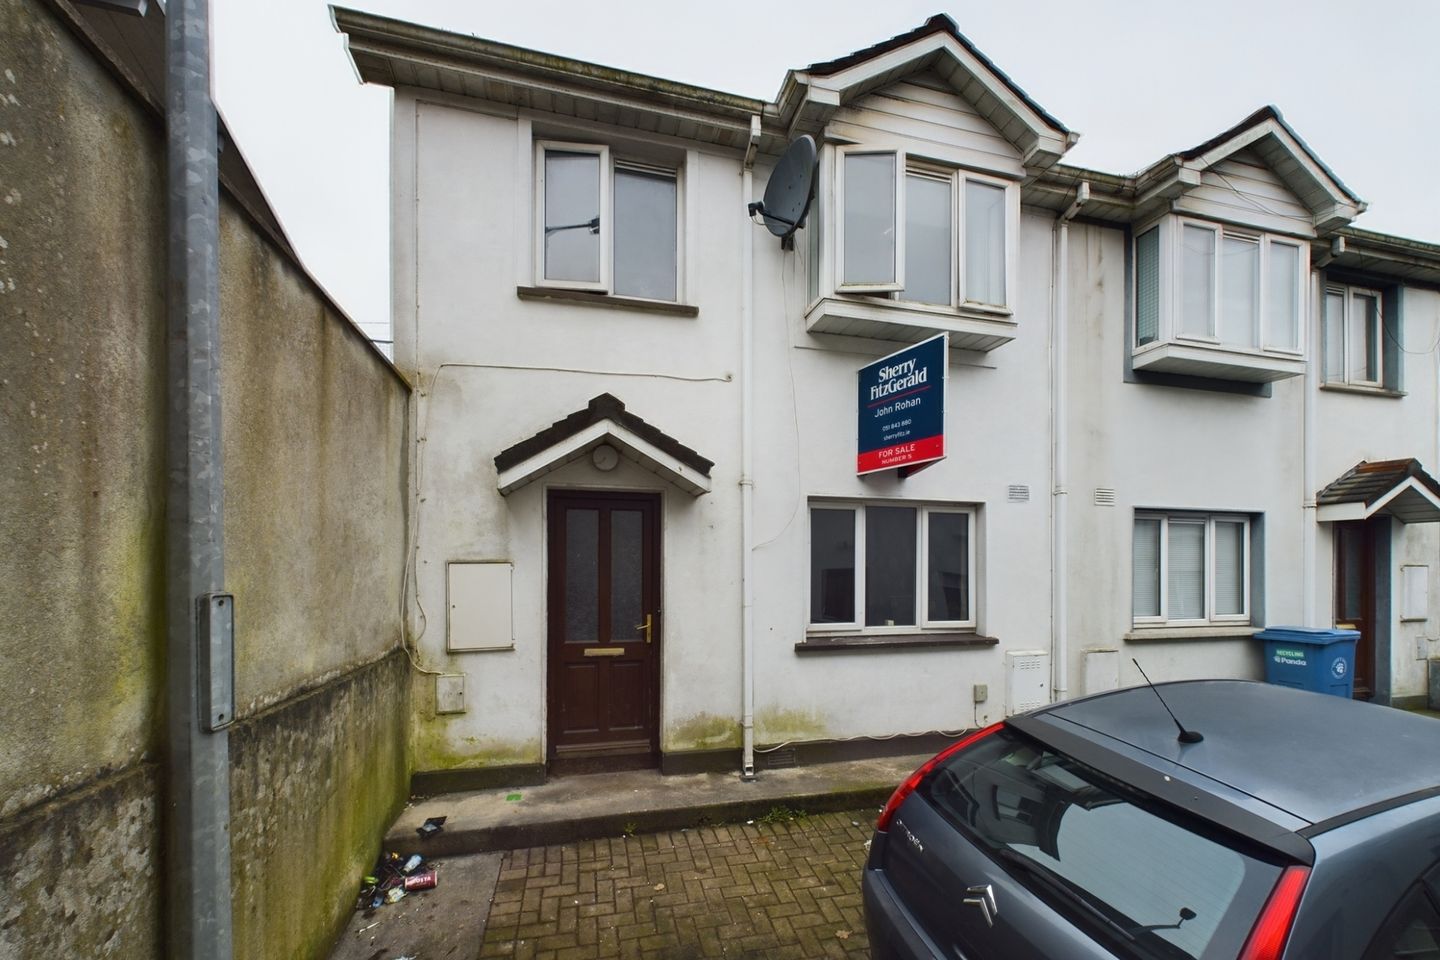 5 Summerhill Mews, Summerhill, Waterford, Waterford City, Co. Waterford, X91P04Y